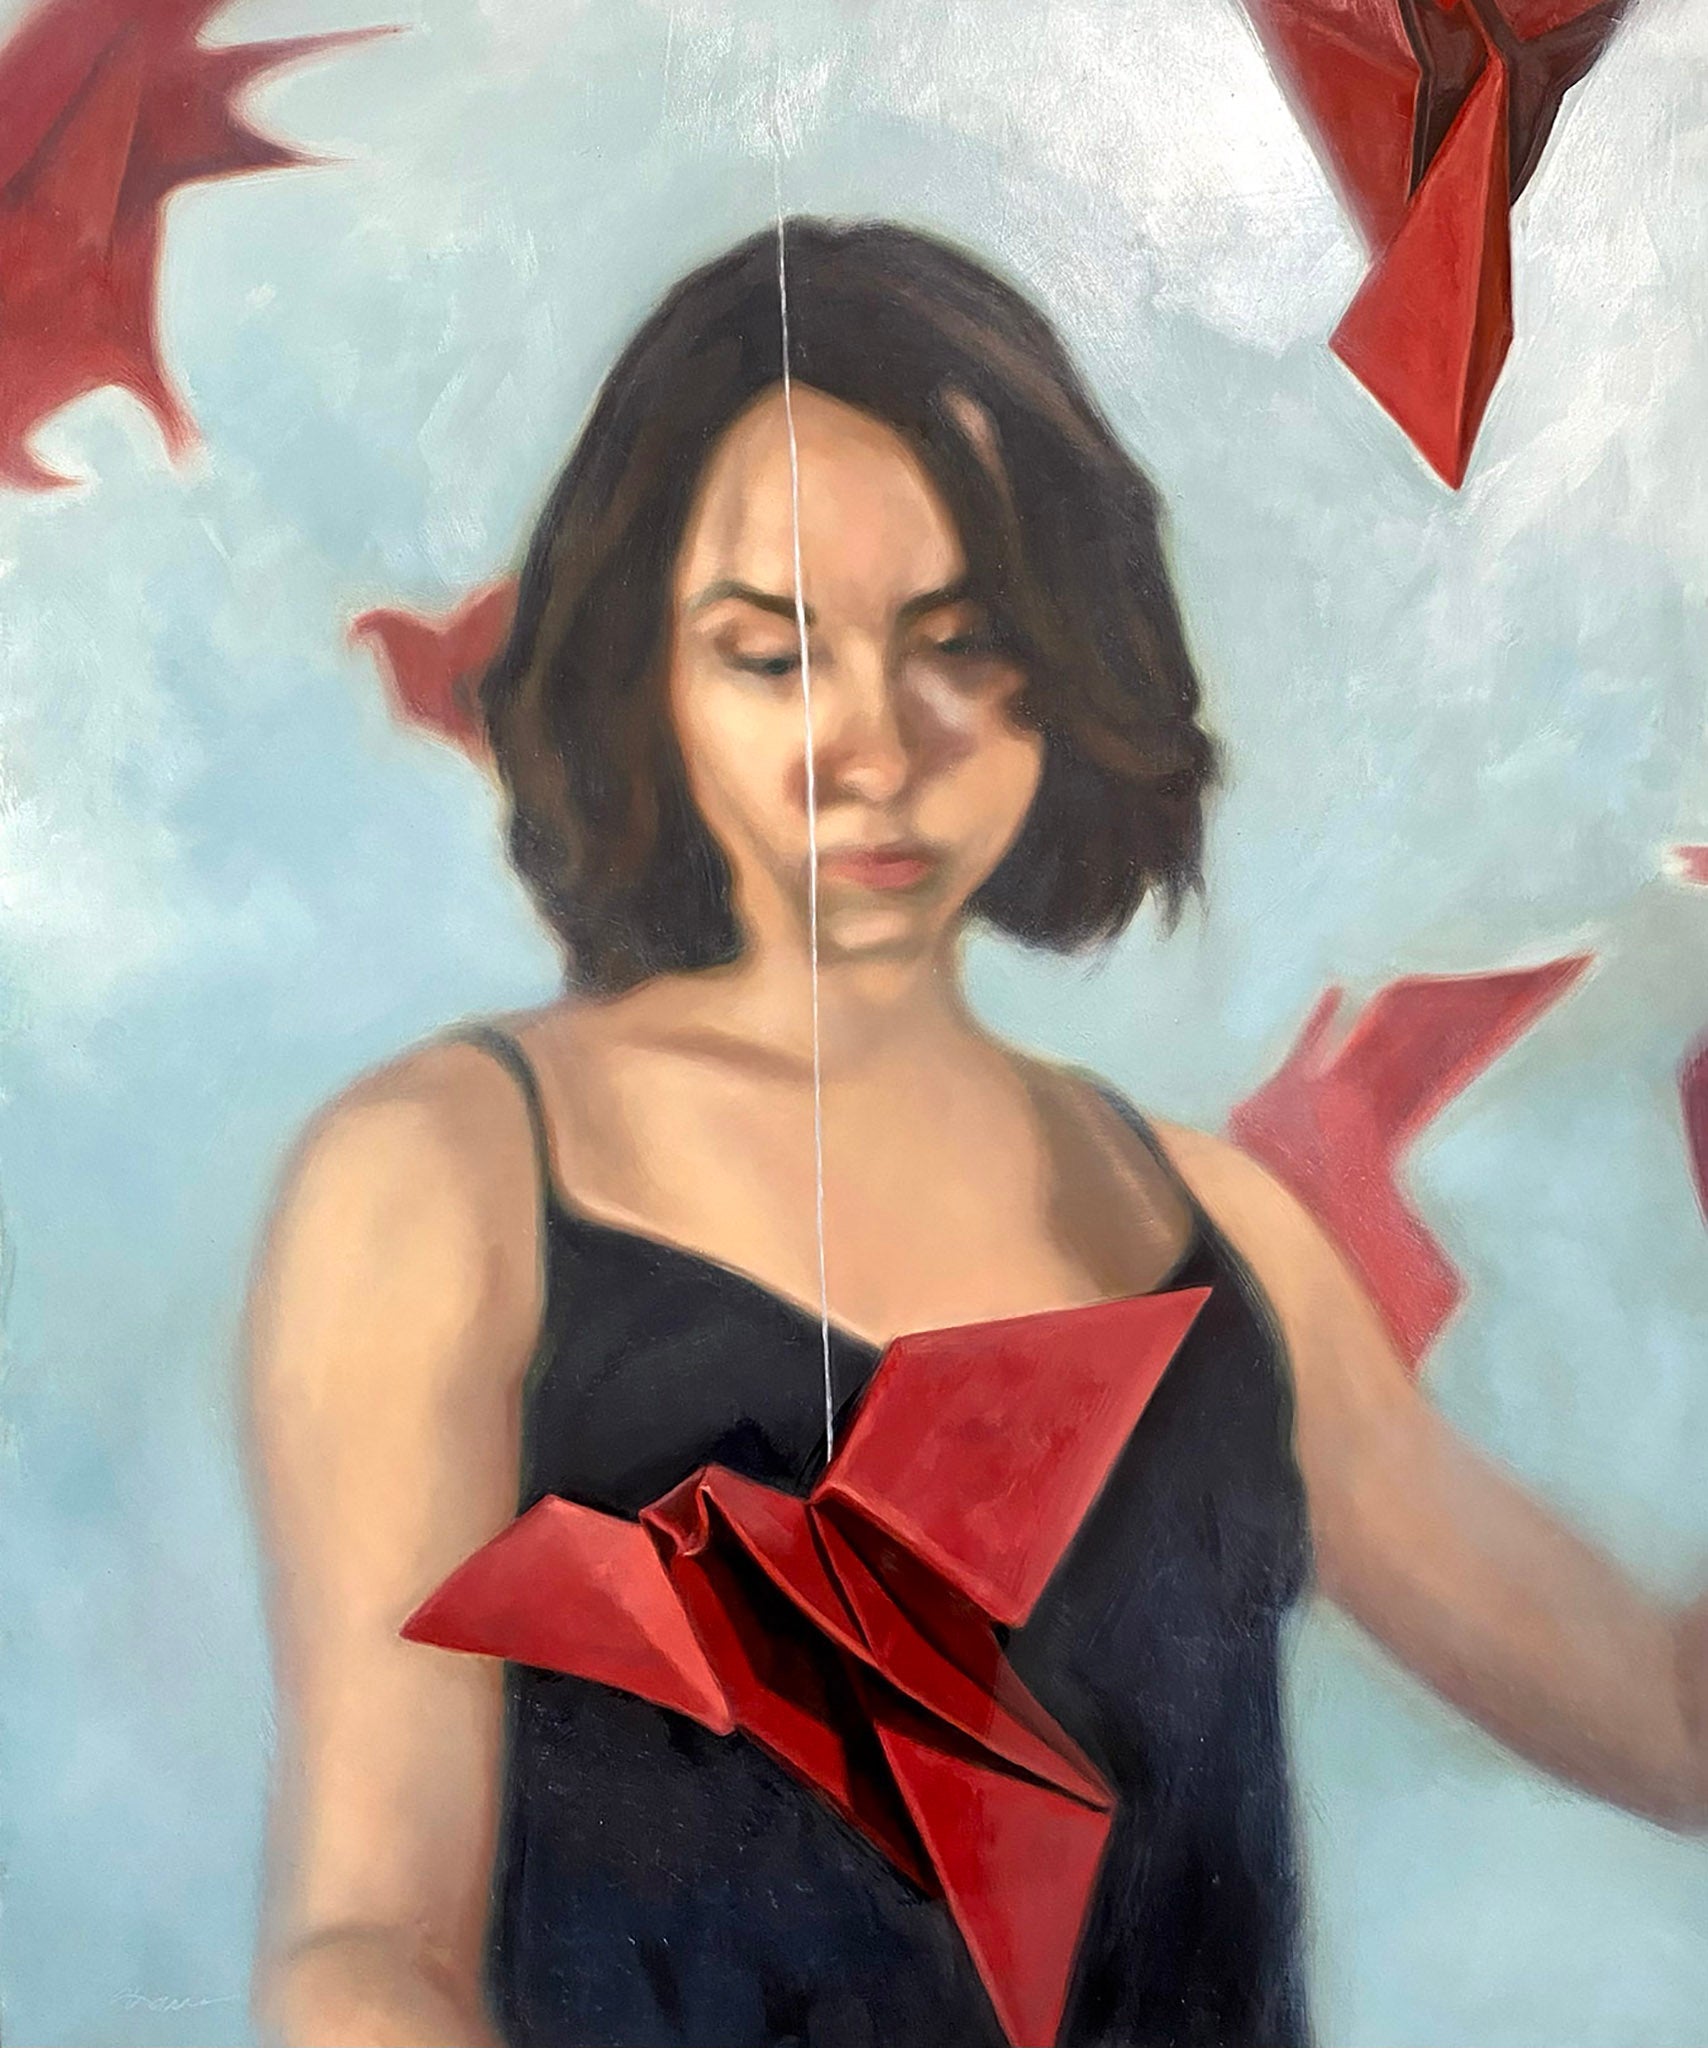 Oil painting of a woman blurred in the background and a red paper crane in focus in the foreground. 20"x24" (21"x25" framed) oil on panel by April Dawes